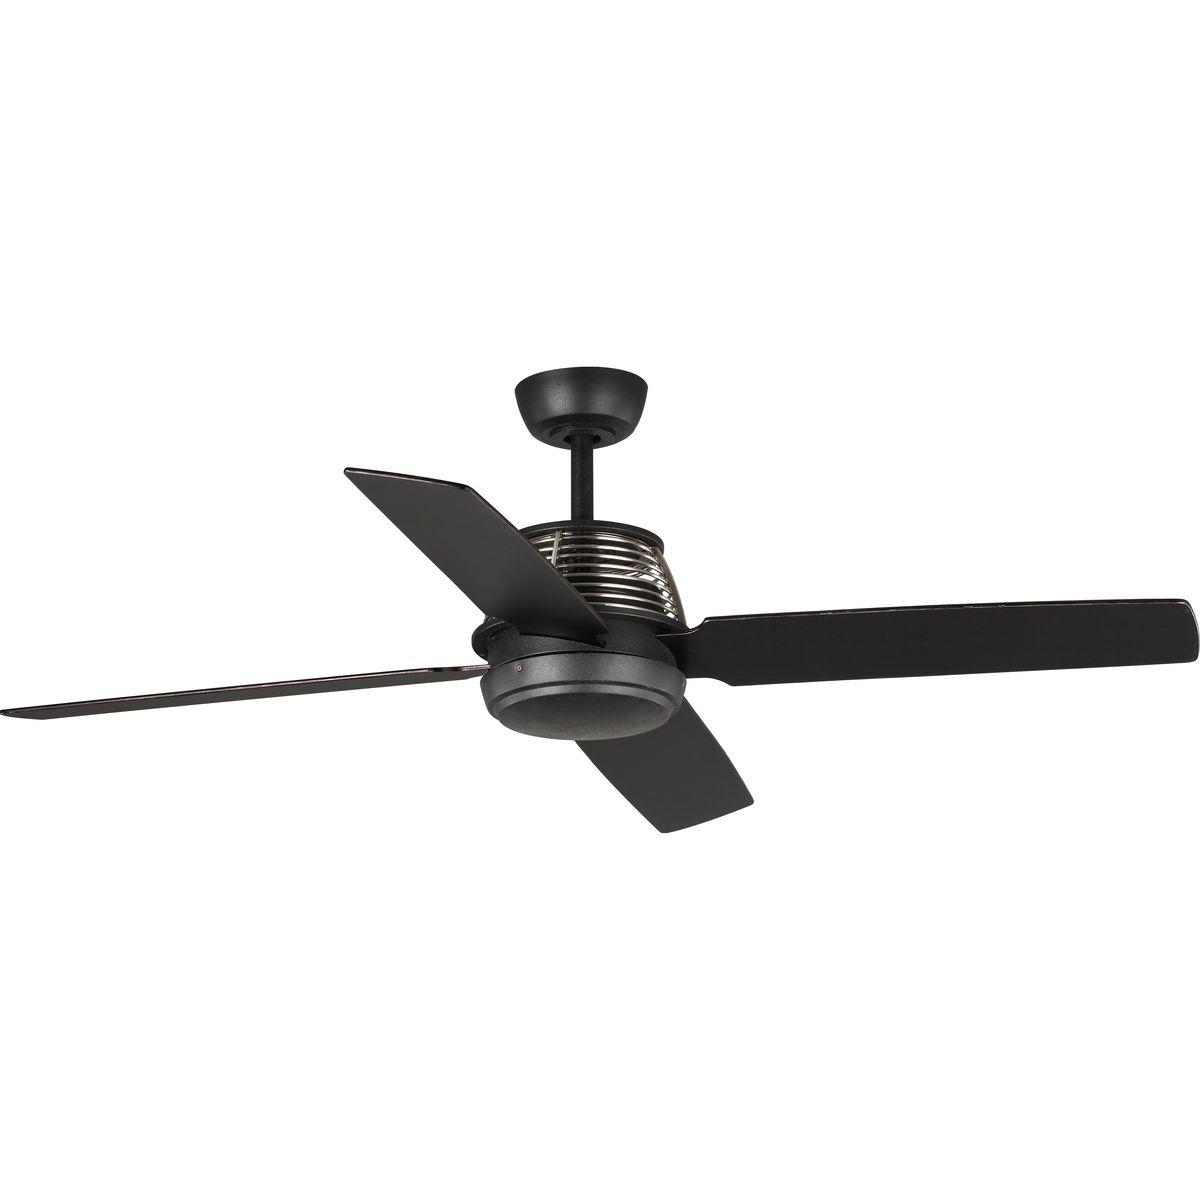 Hubbell P2590-80 The 56” Schaffer four-blade ceiling fan blends a streamlined design with mixed metal elements and a wire mesh housing, suitable for modern and urban industrial spaces. The Forged Black ceiling fan comes with chrome accents. A remote control with batteries